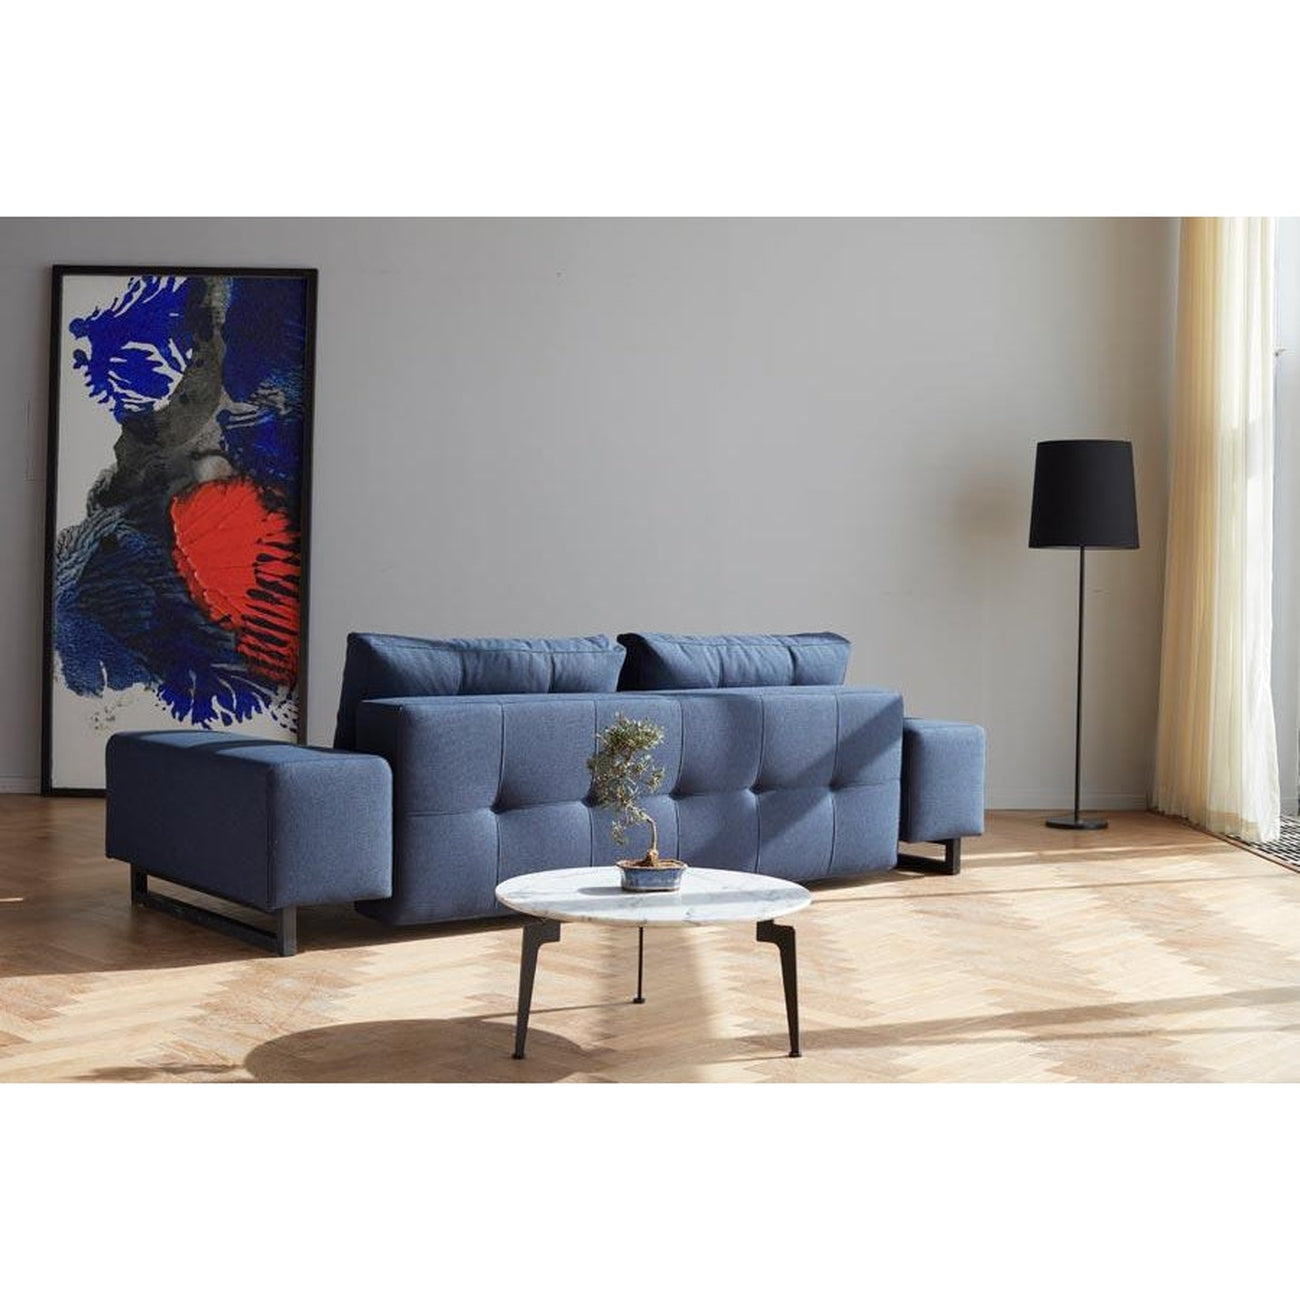 Grand D.E.L sofa BLACK WOOD (QUEEN)-Innovation Living-INNO-94-748190527-3-SofasMixed Dance Natural-3-France and Son